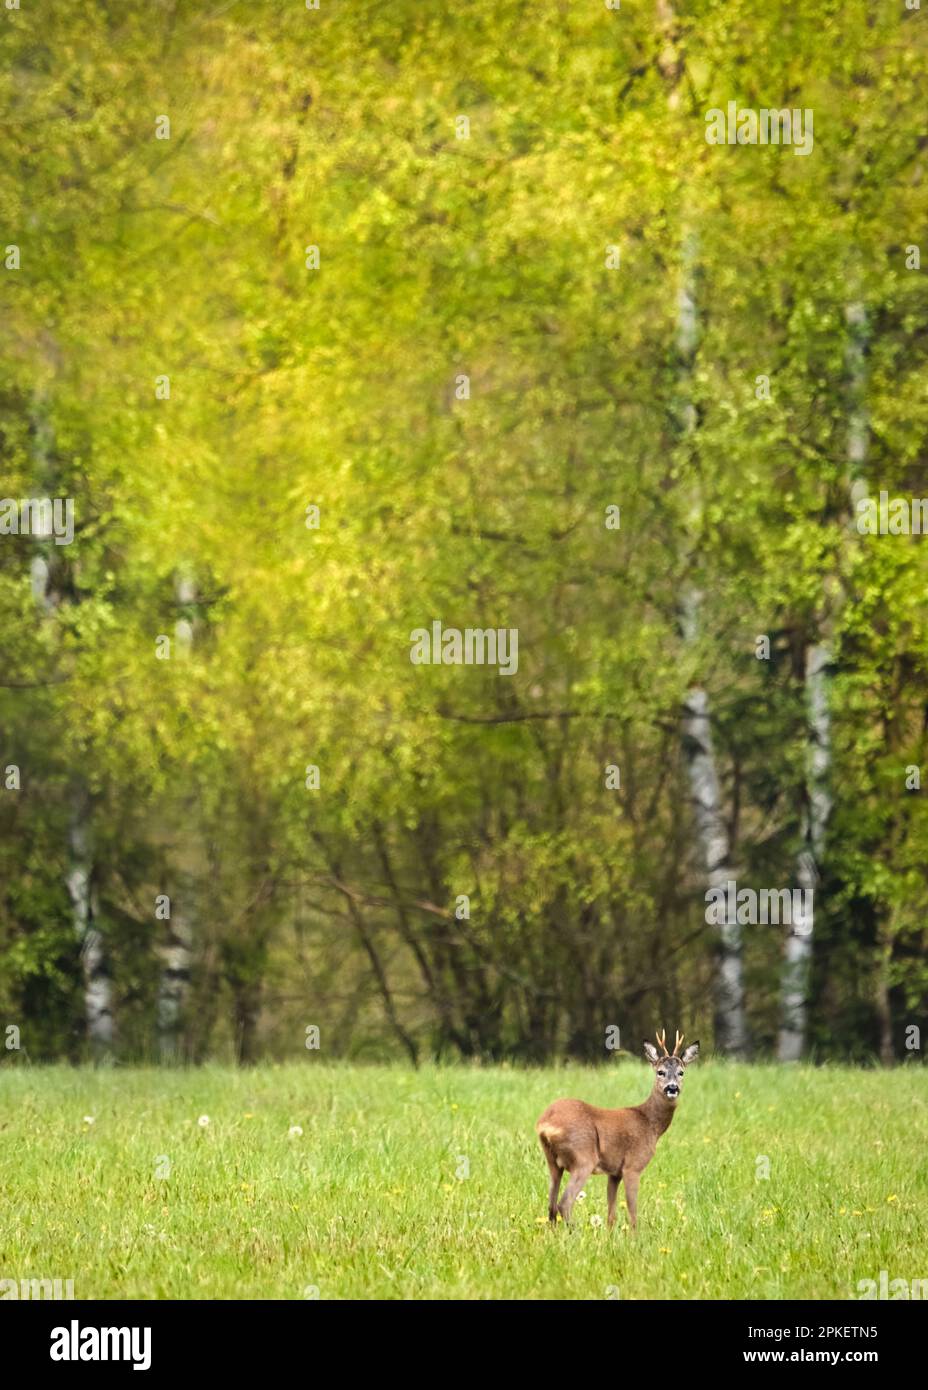 A juvenile male deer or buck on a lush green meadow looking into the camera, lush green birch trees in the background Stock Photo